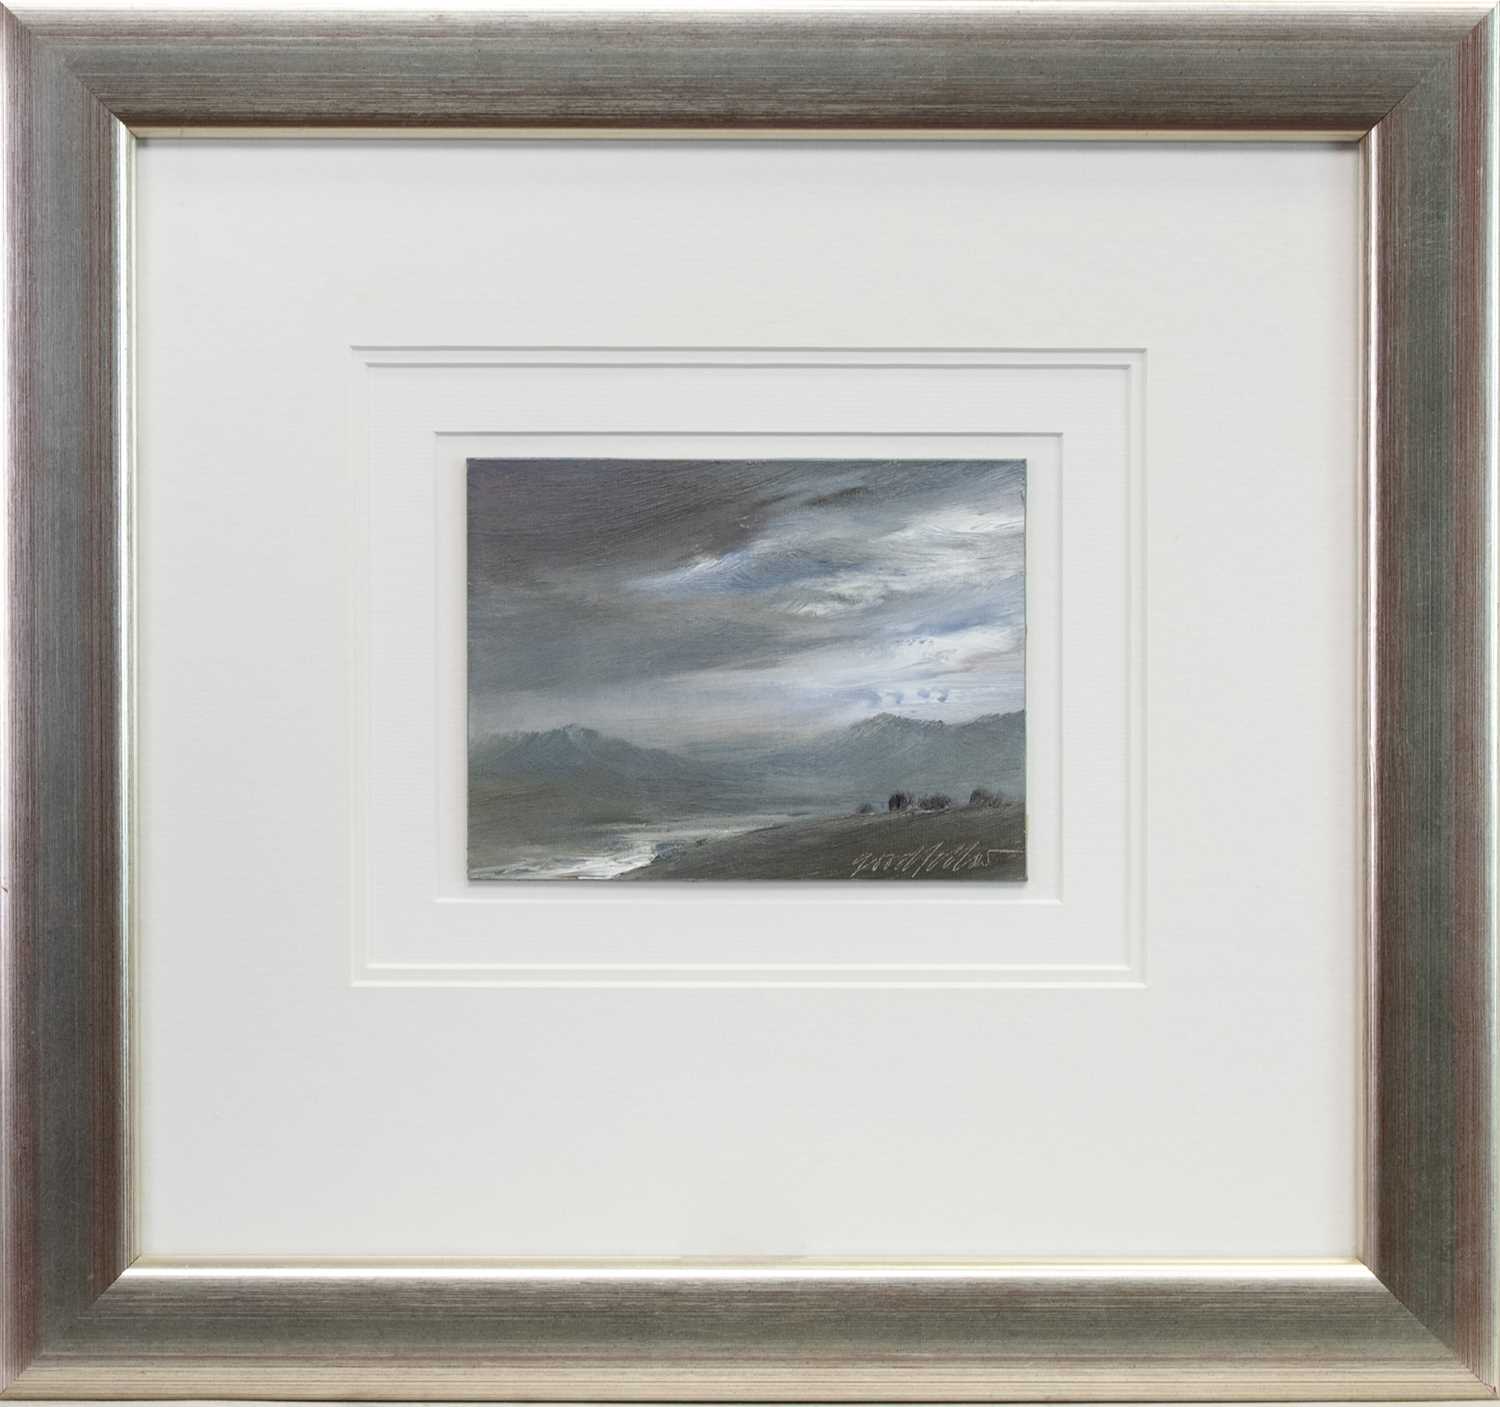 Lot 528 - GLOAMING STRATHCONNON, AN OIL BY PETER GOODFELLOW